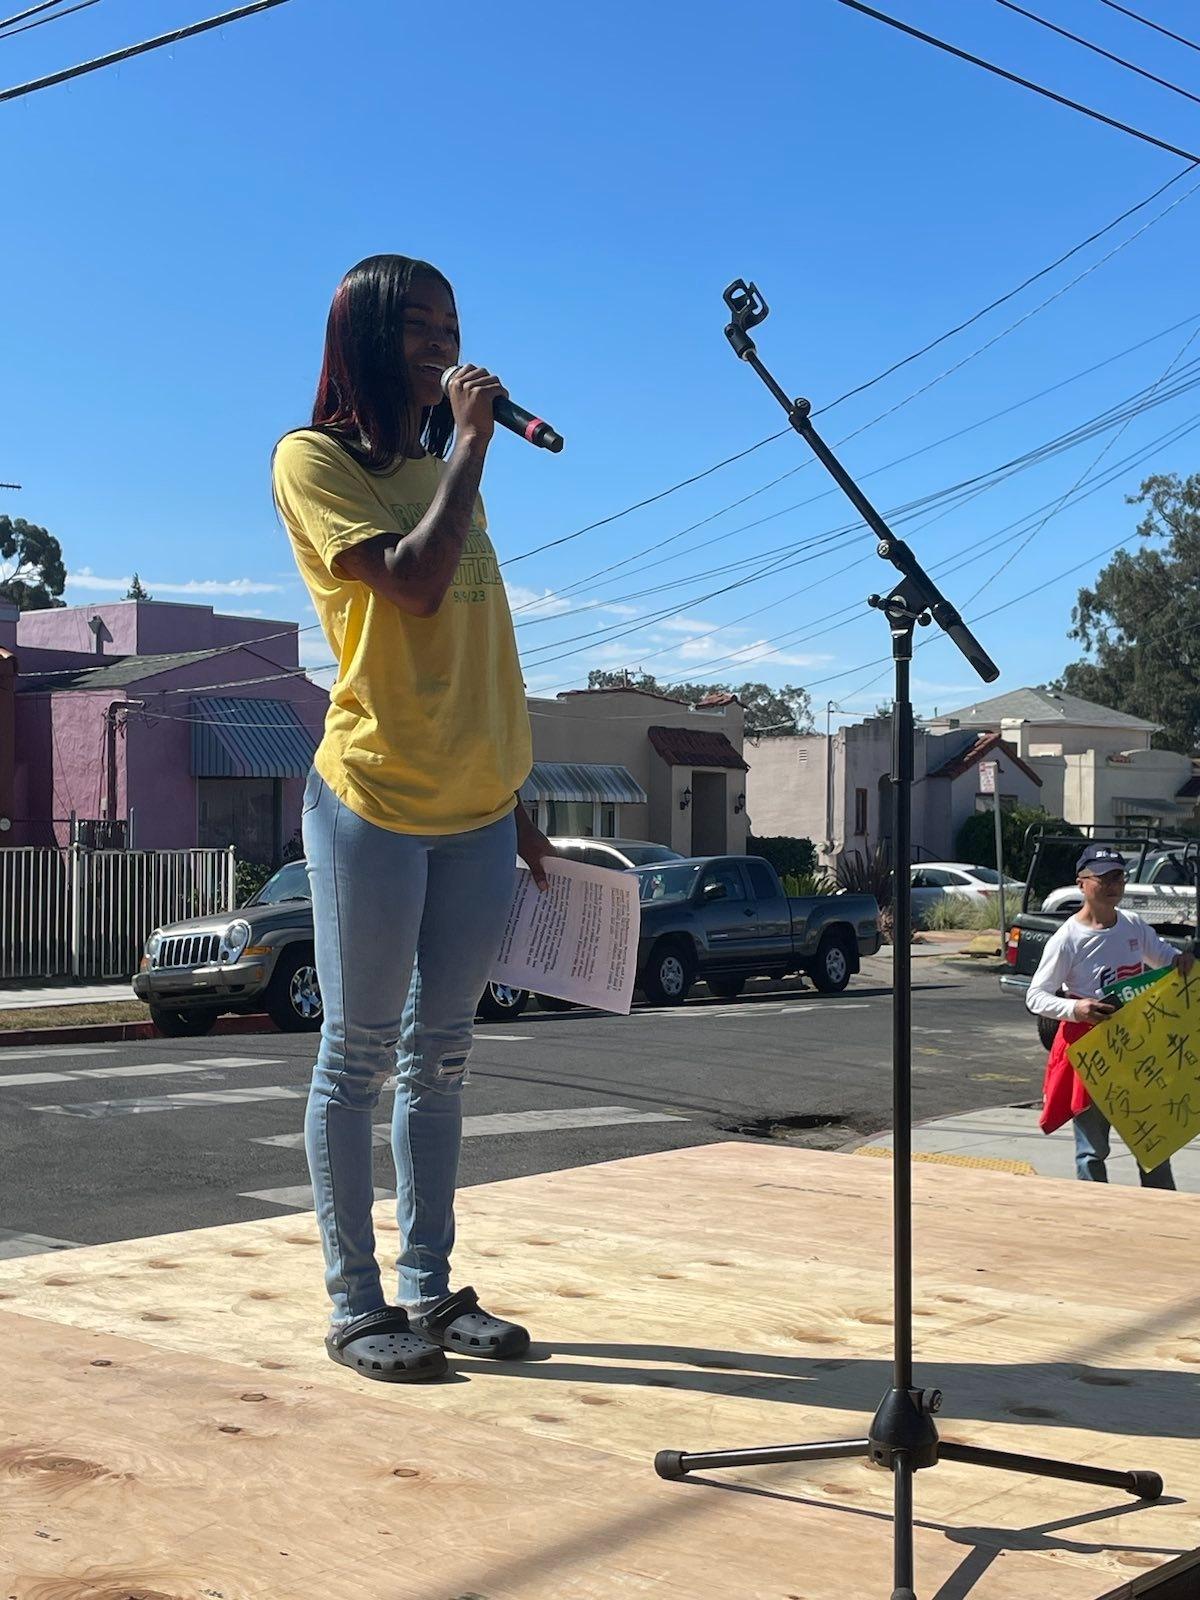 Dashawnna Warrick speaks as locals concerned about public safety issues gather outside of a "Community Safety" meeting attended by local government and law enforcement officials at the Genesis Worship Center in East Oakland, Calif., on Sept. 9, 2023. (Courtesy of Loretta Breuning)